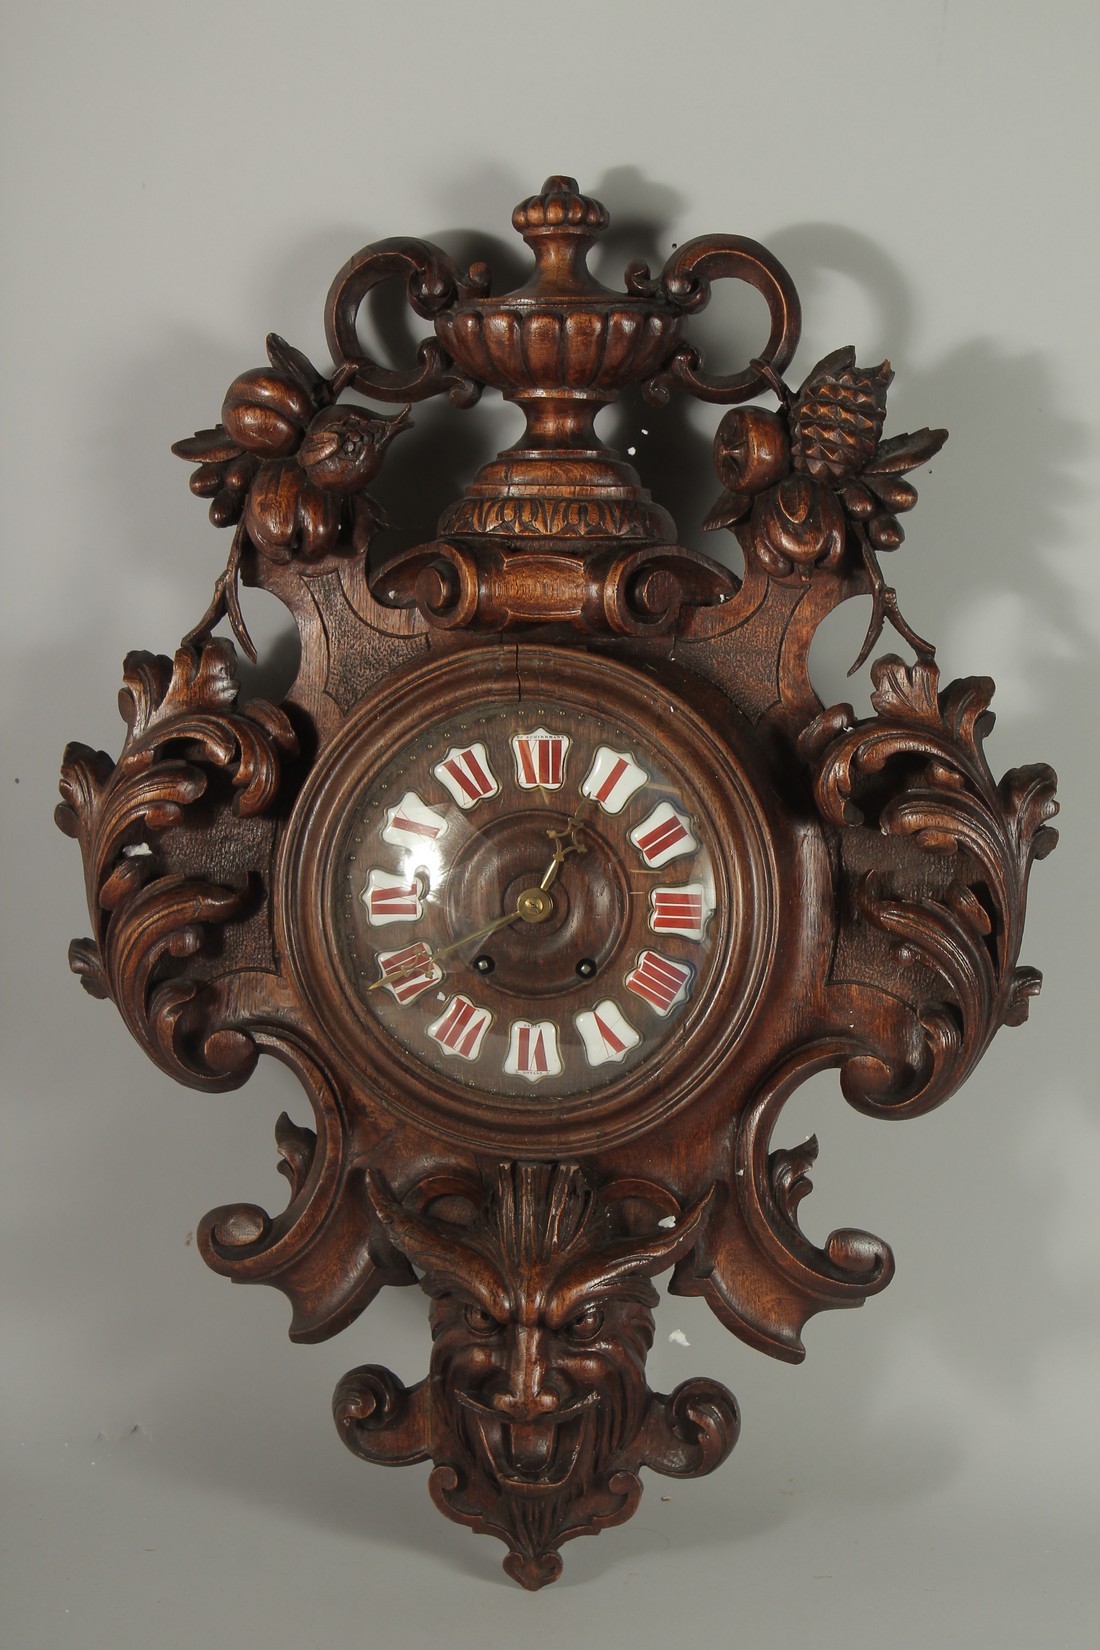 A LARGE CARVED WOOD CLOCK with urns and acanthus scrolls. 28ins high.